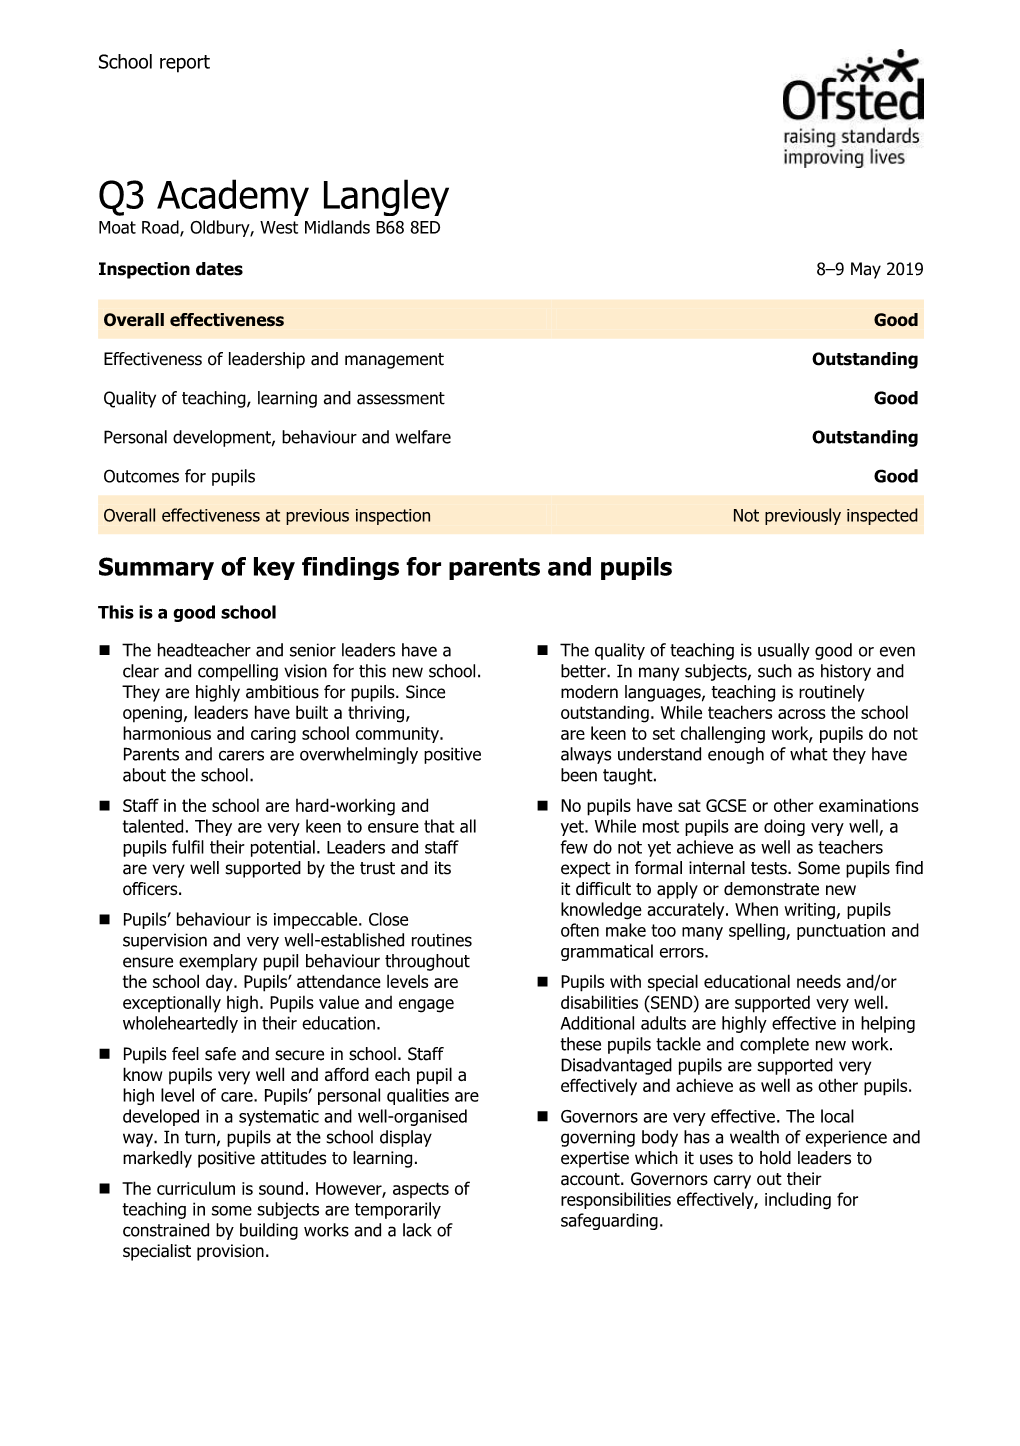 OFSTED Report 2019